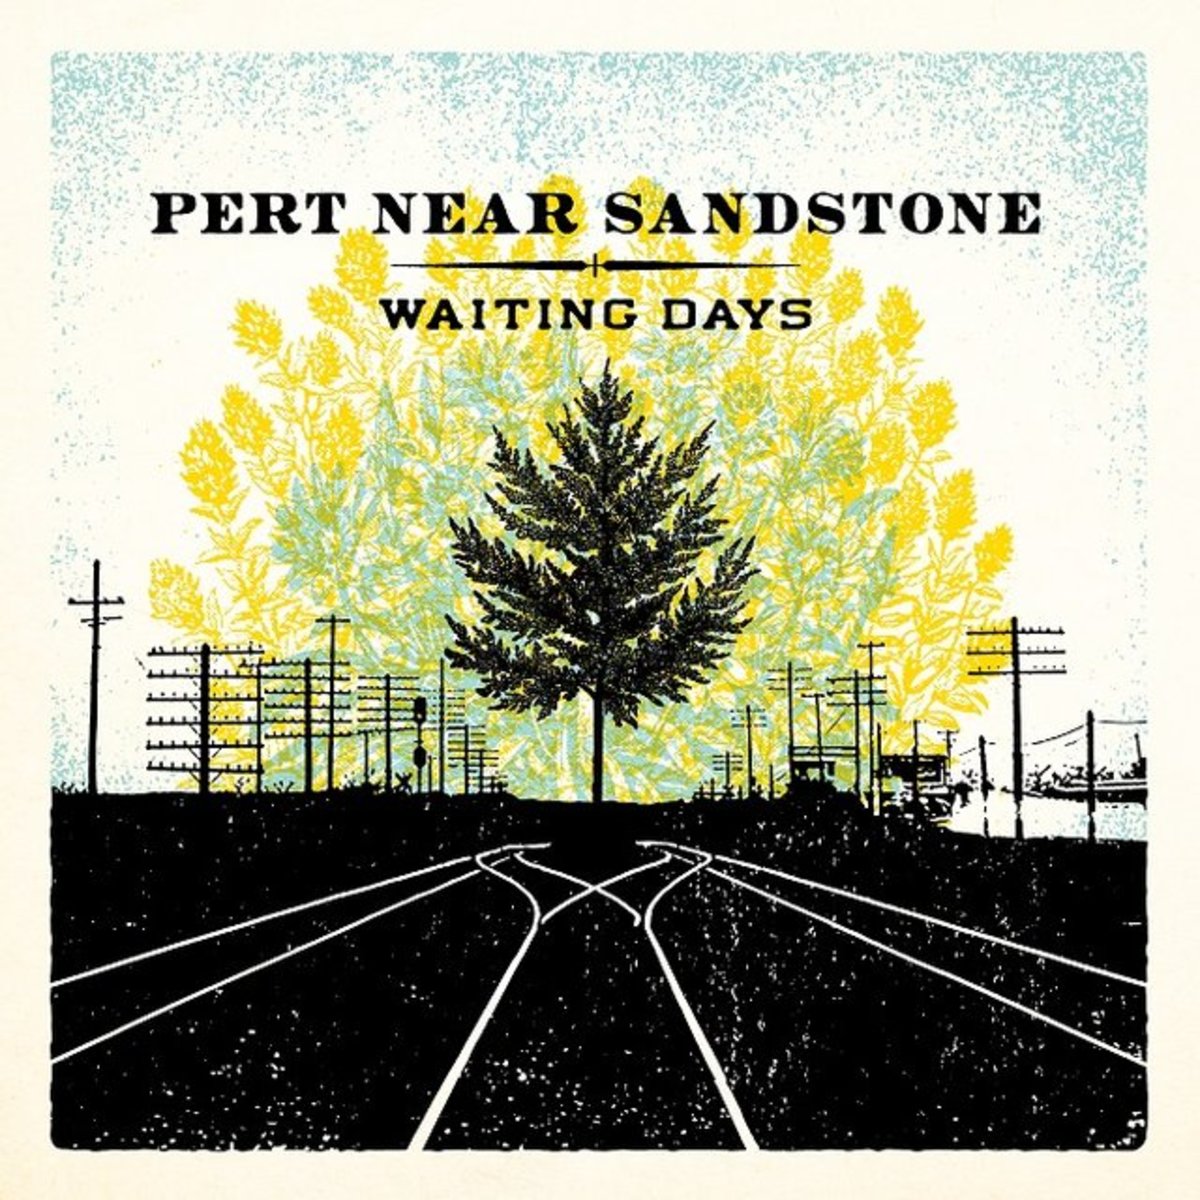 Now Playing: Pert Near Sandstone’s ‘Waiting Days’